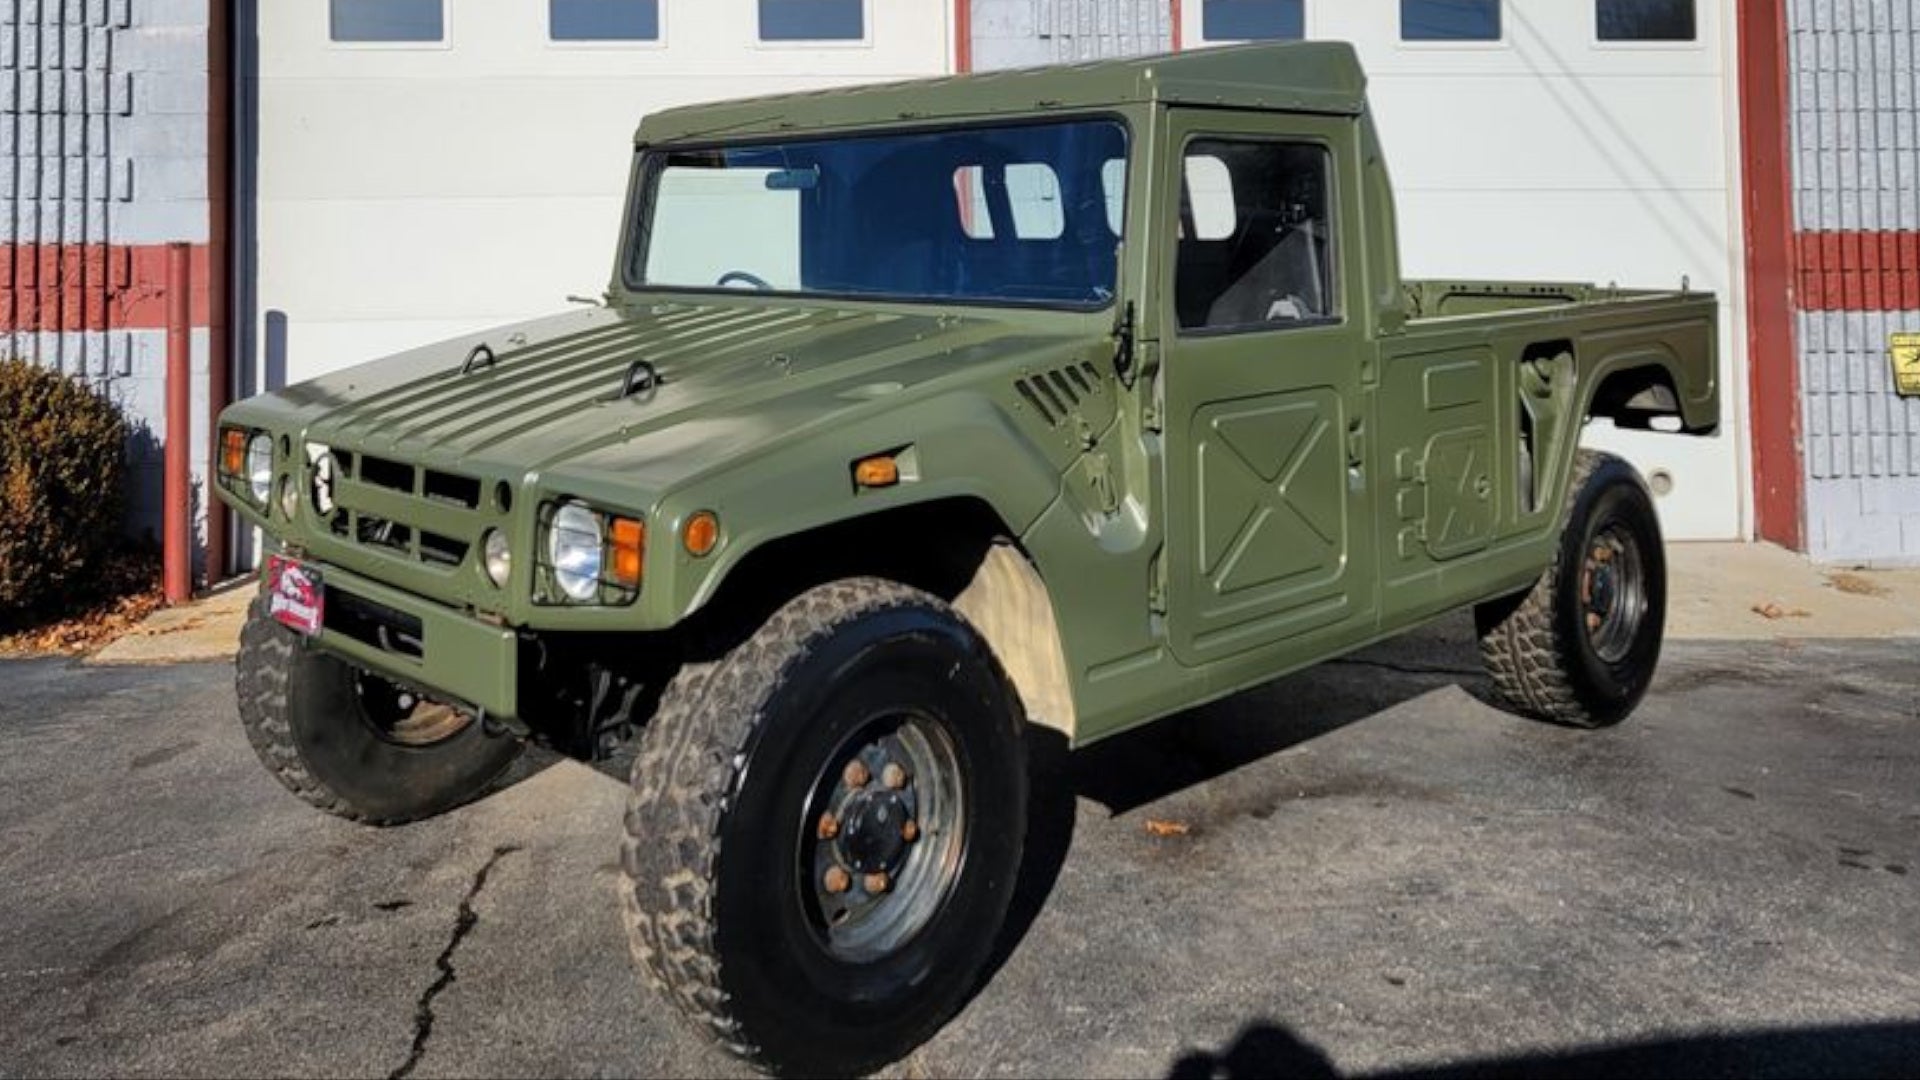 Buy This Low-Mileage Military Toyota Mega Cruiser for $55,000